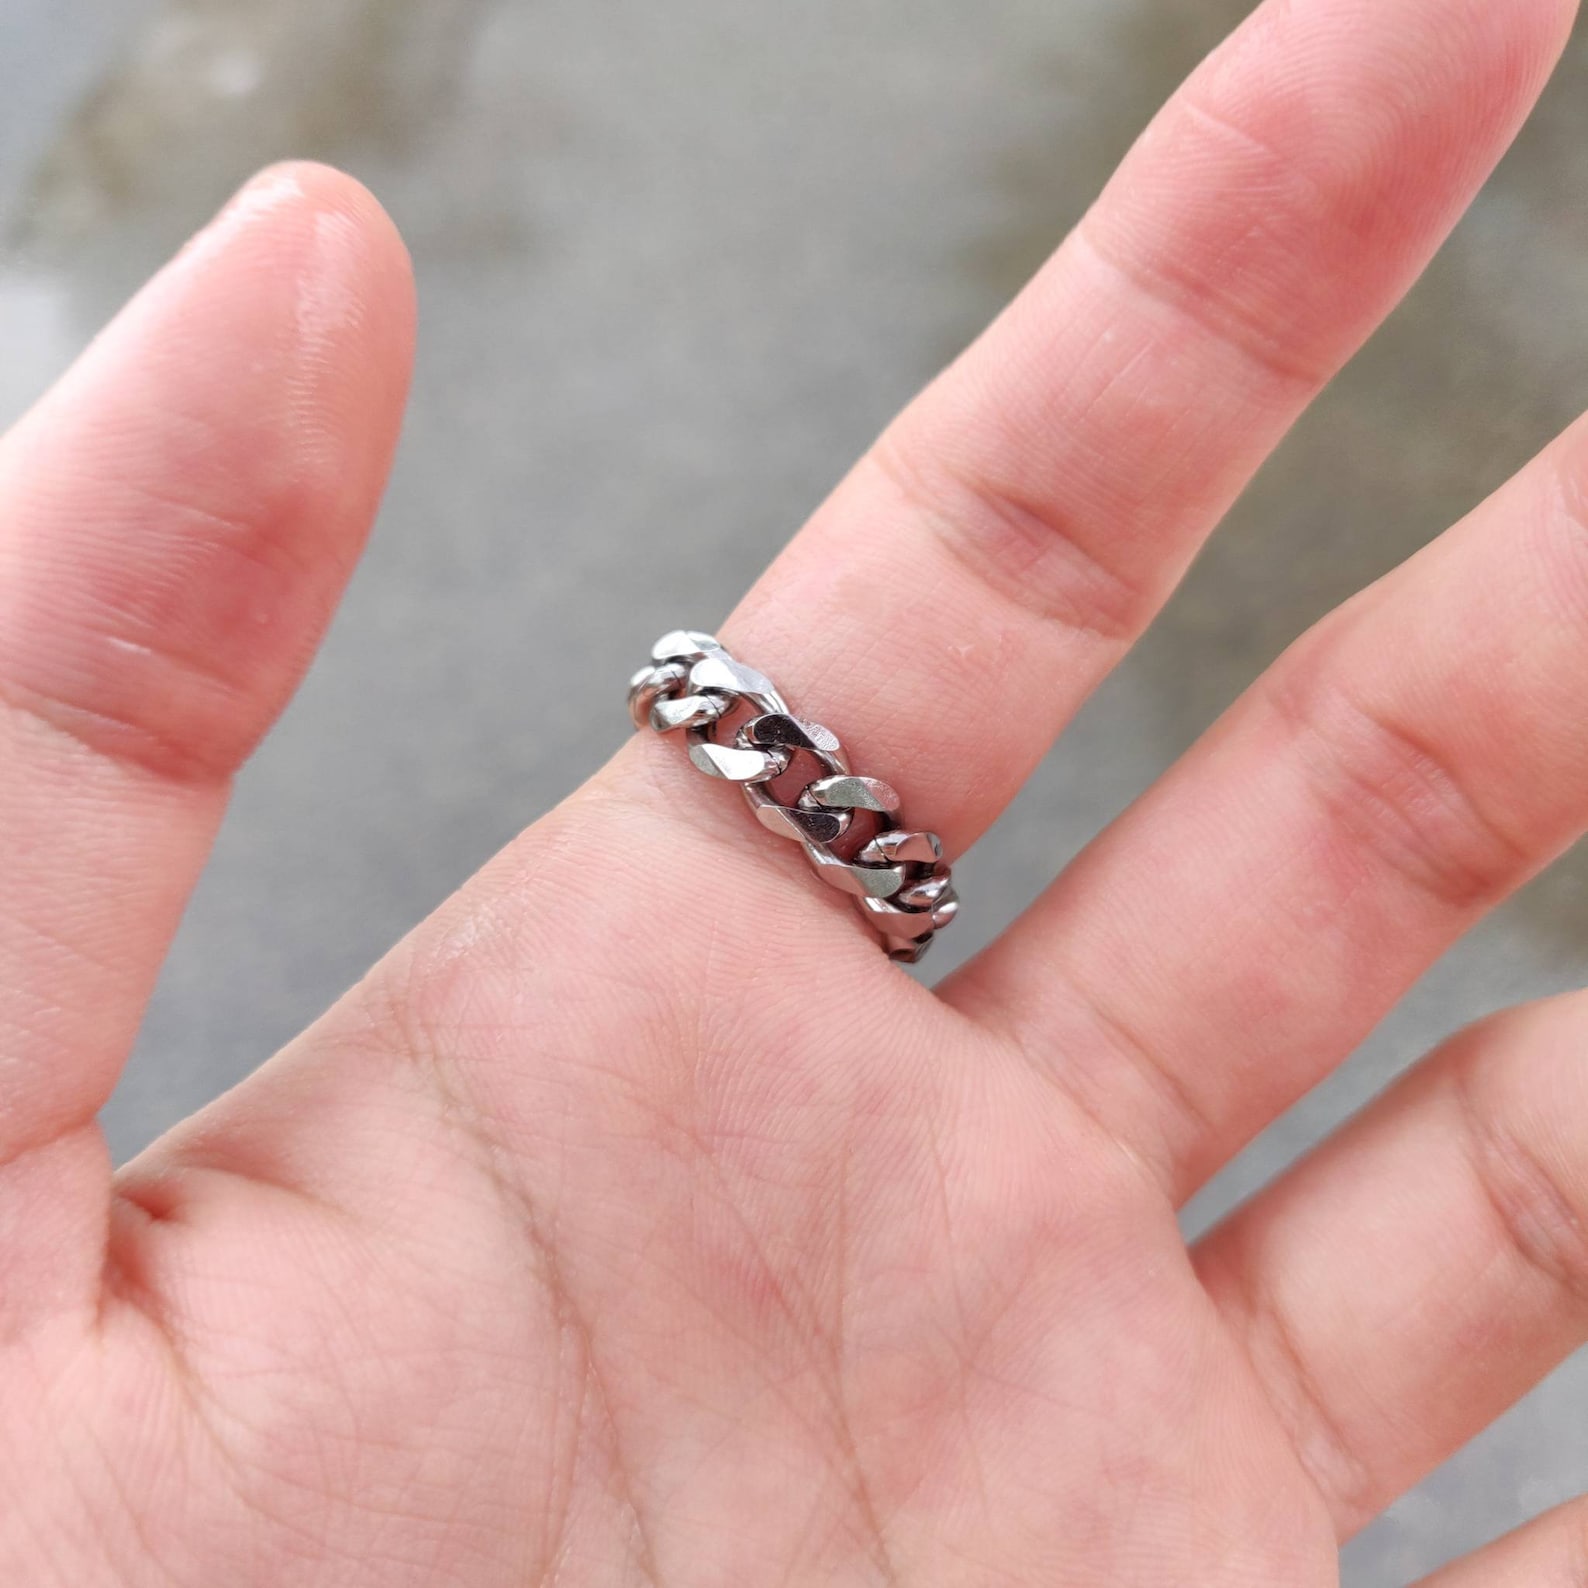 Silver Stainless Steel Curb Chain Ring Version 2 Eboy Etsy